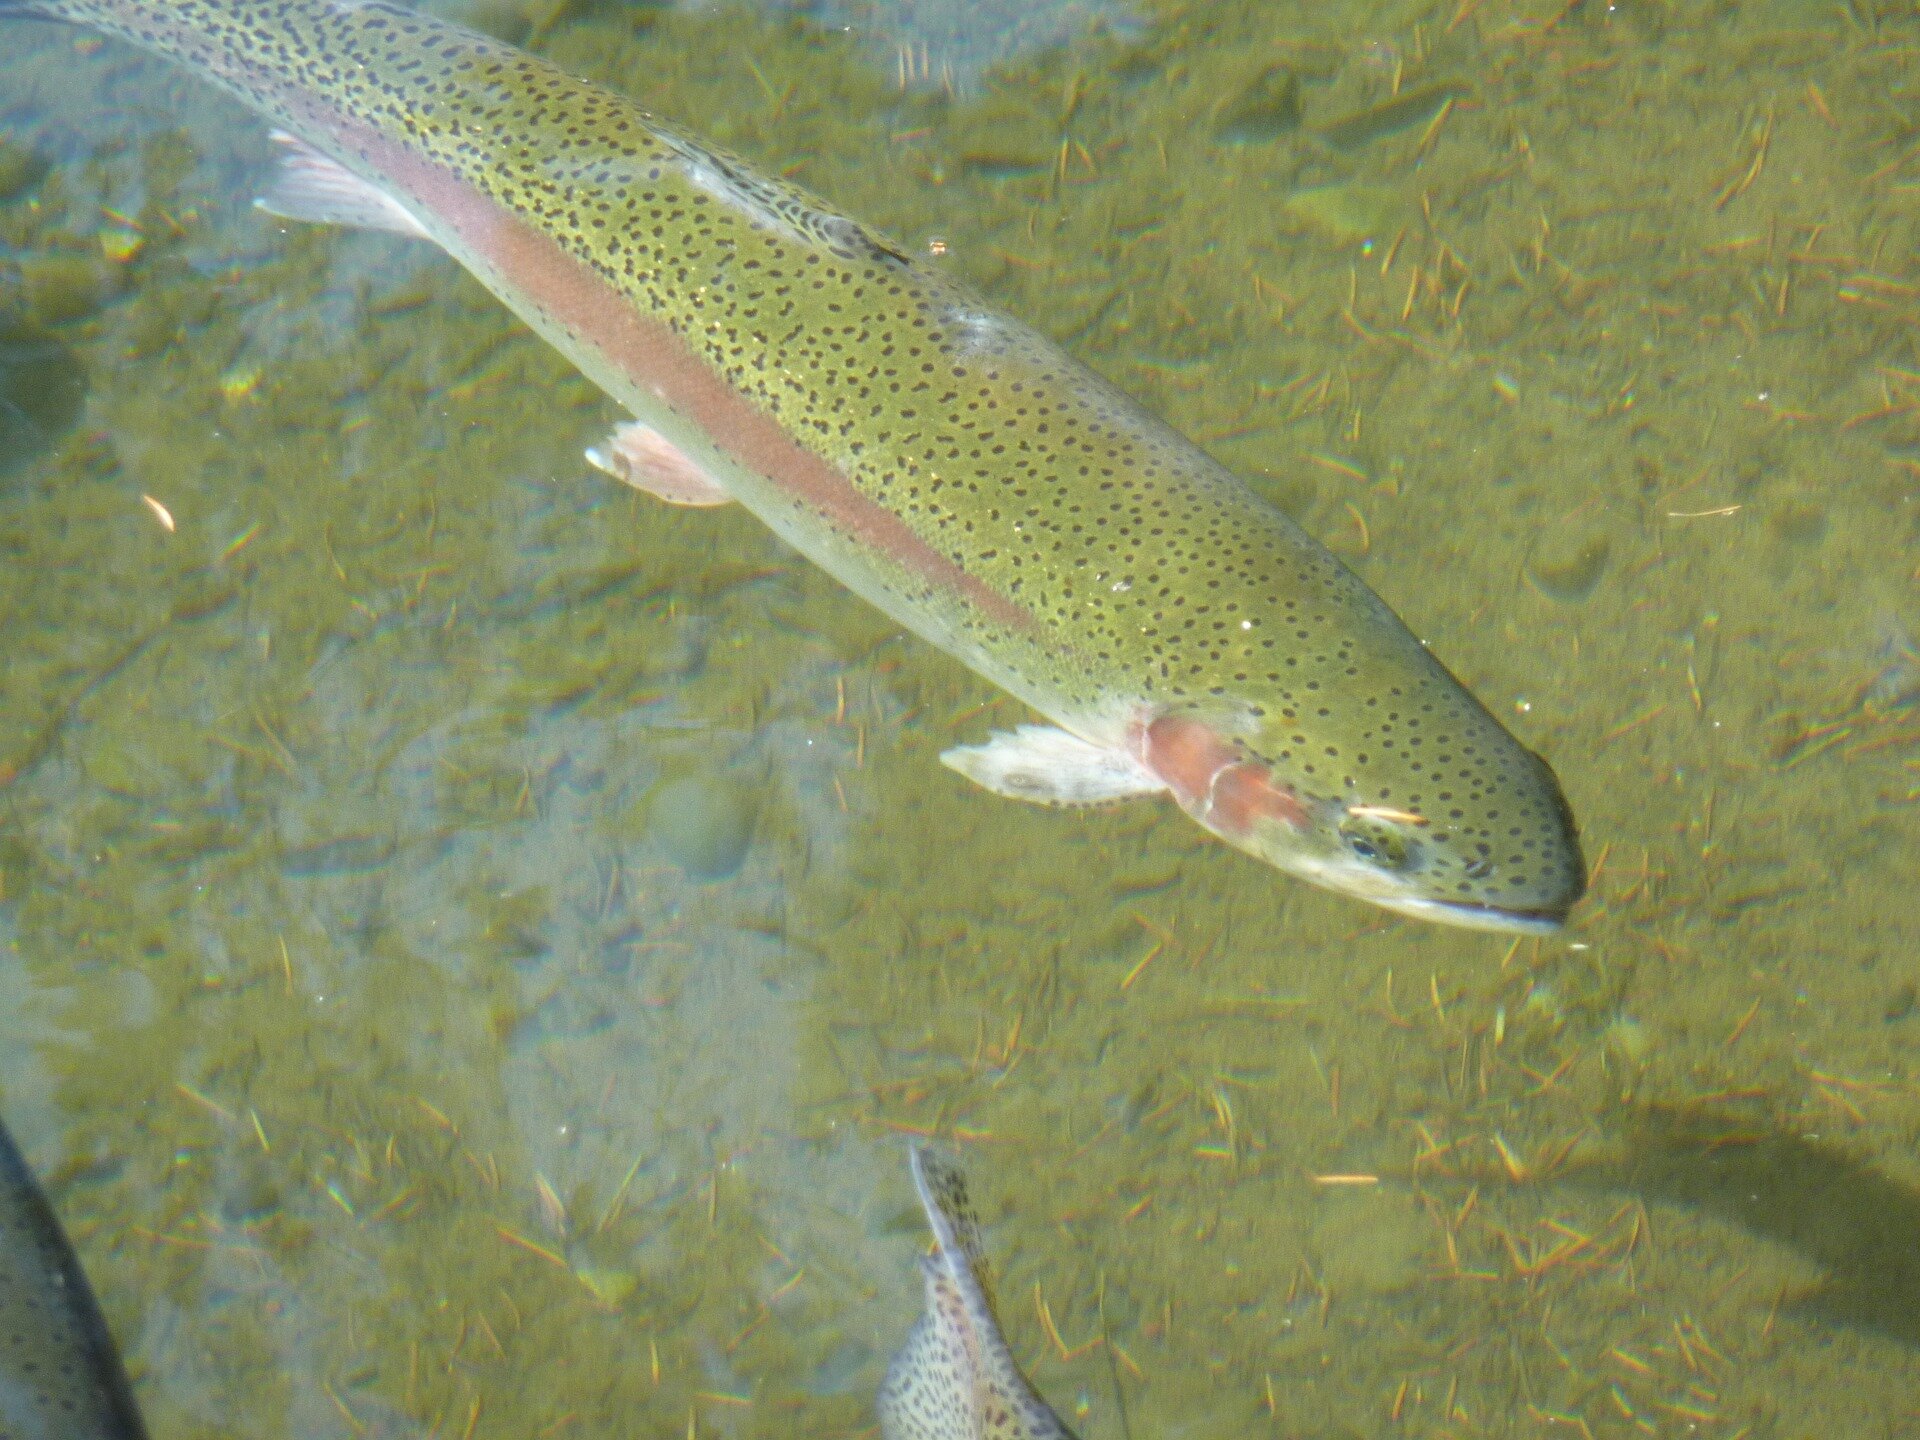 Heat and drought point to trouble ahead for Montana's trout